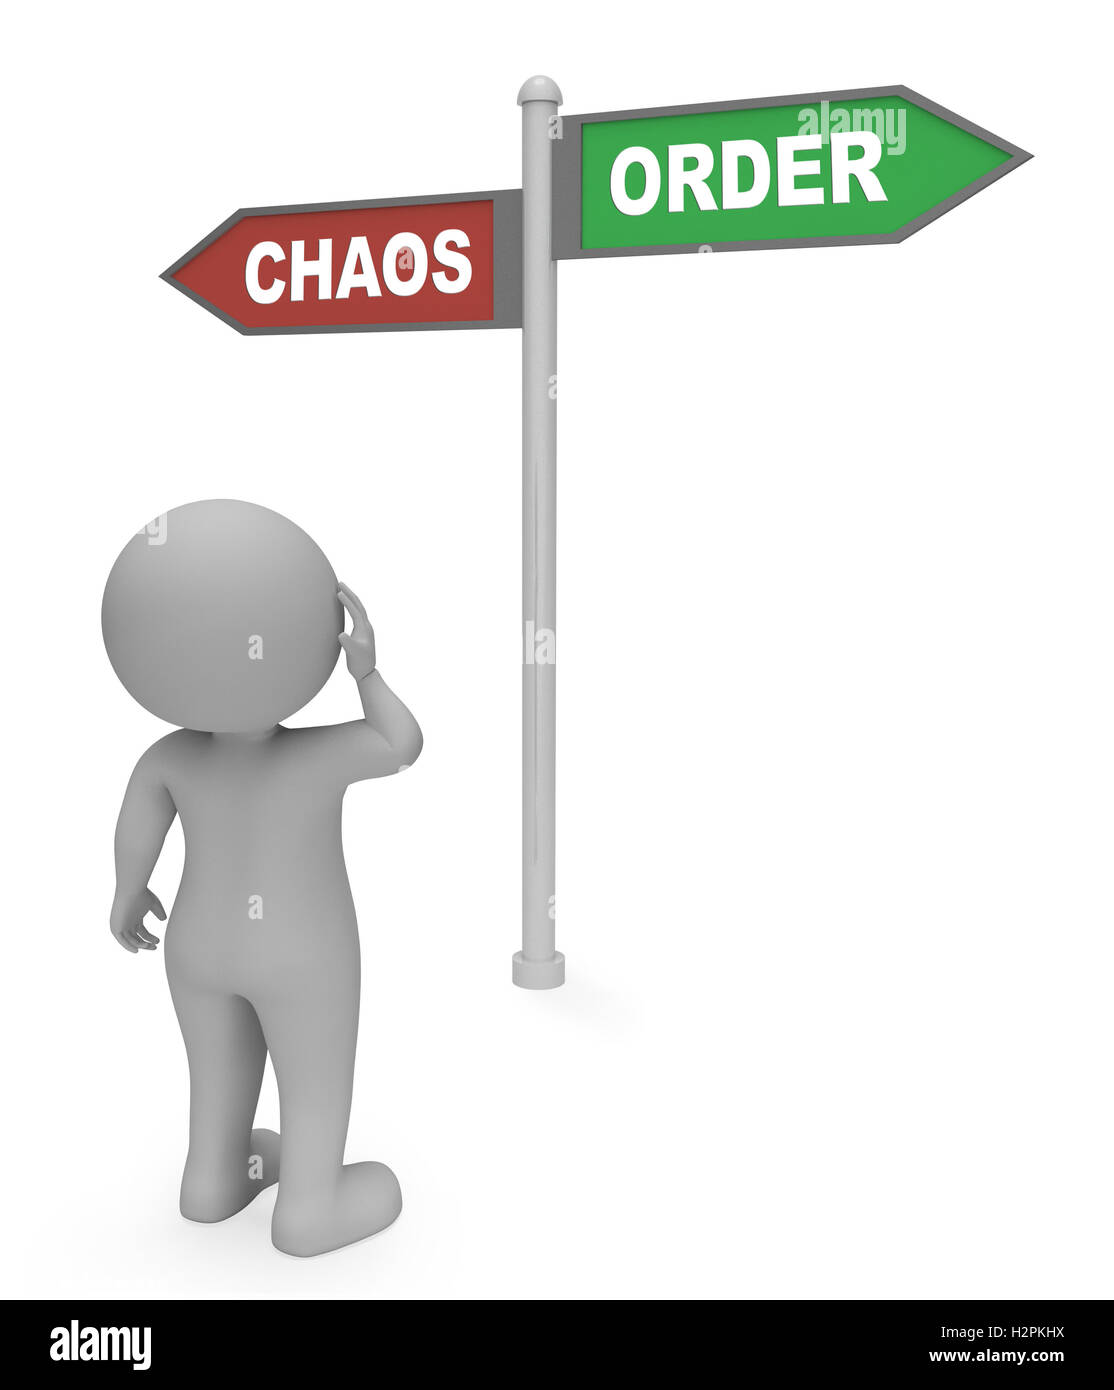 Character Looking At Chaos Order Signpost Shows Confusion And Mayhem 3d Rendering Stock Photo